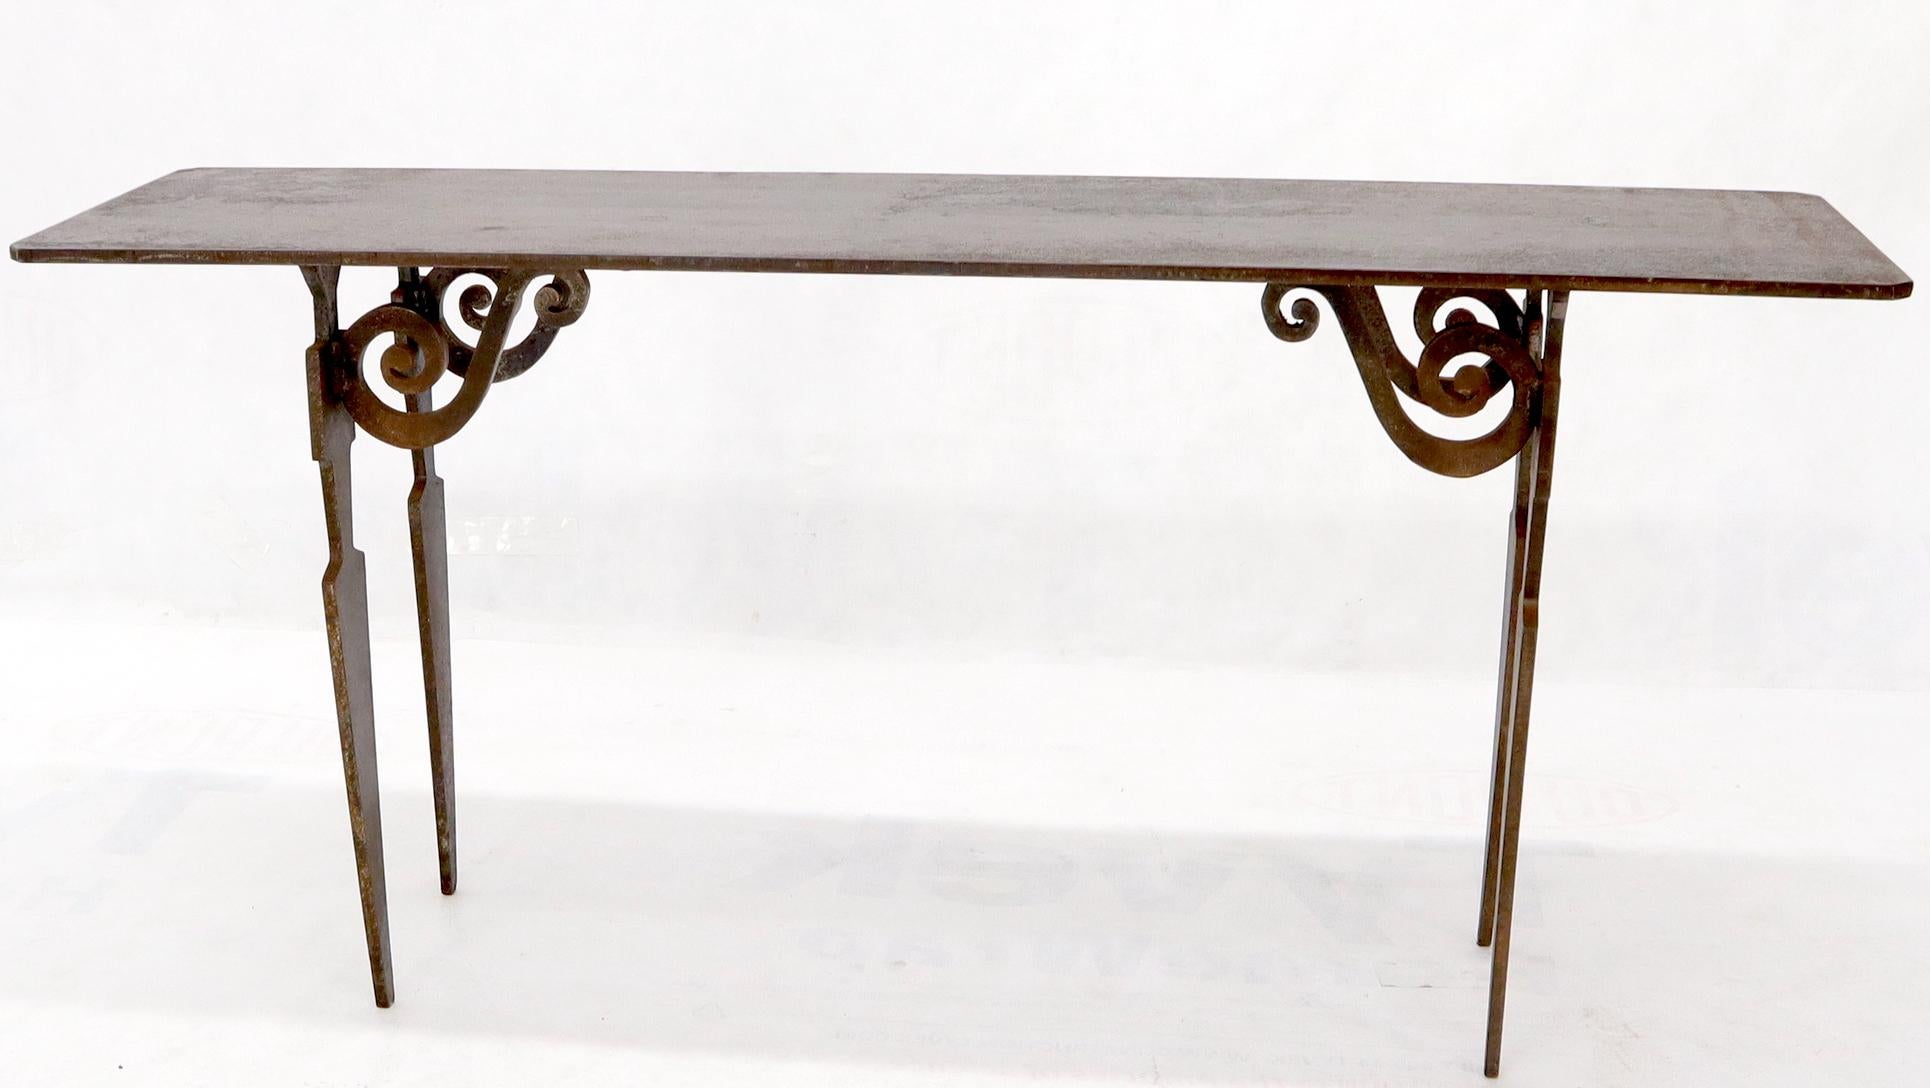 American Thick Solid Steel Plate Top Cut Steel Legs Coffee Table Steam Punk Console Table For Sale